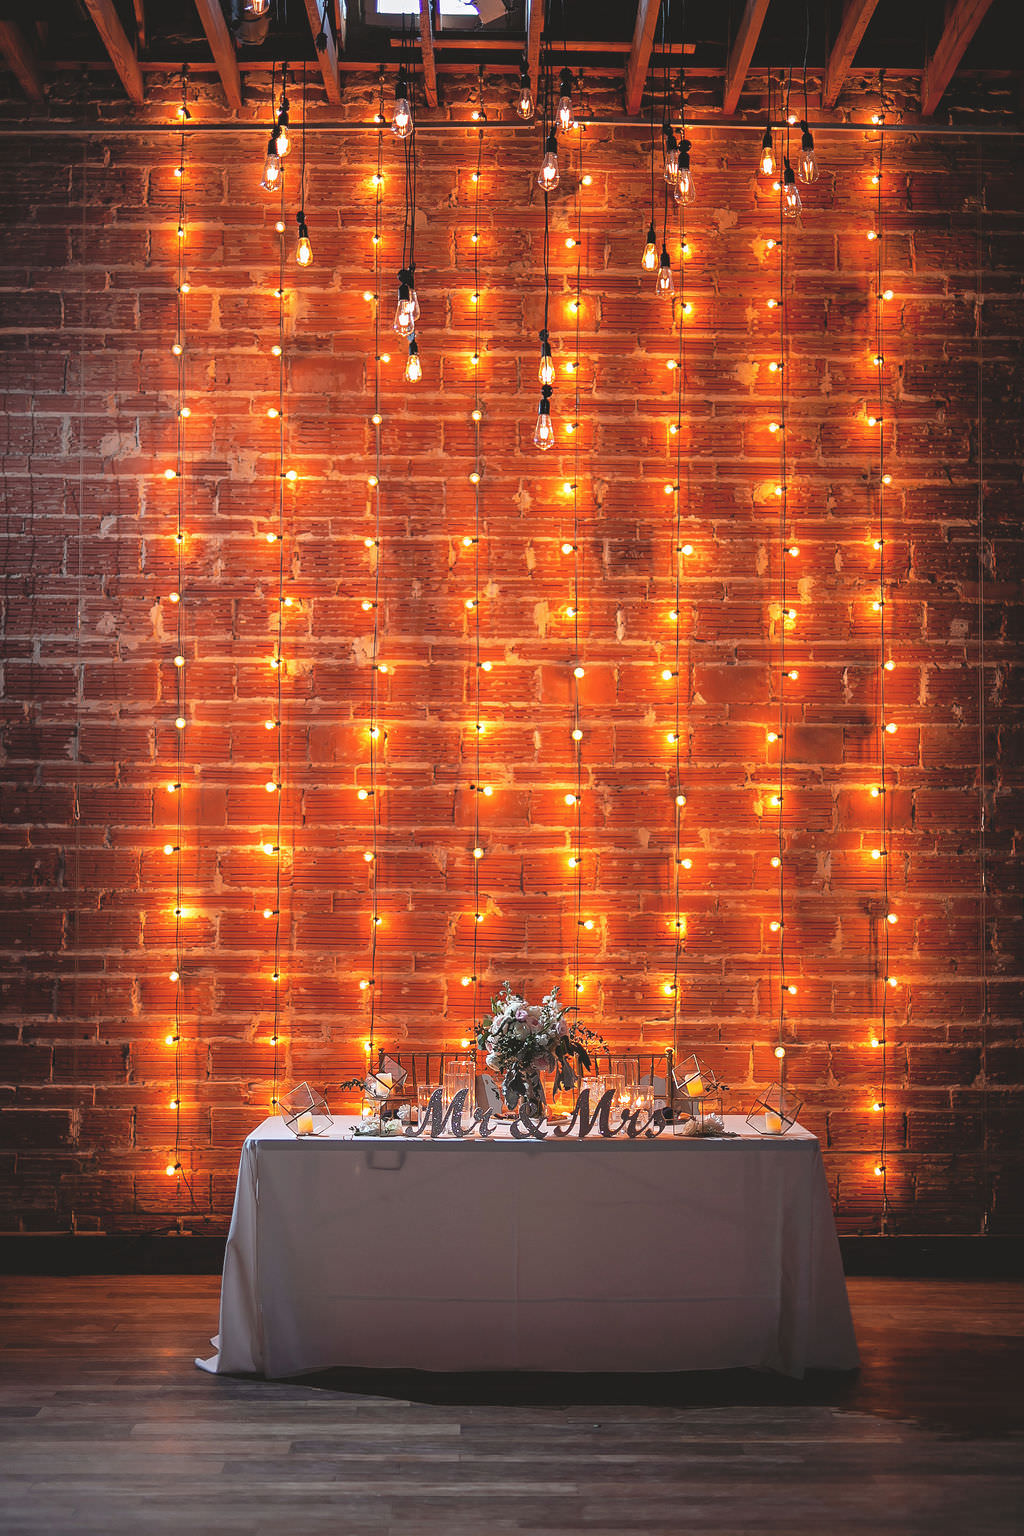 Romantic Sweetheart Table at Wedding Reception with Exposed Brick Wall and String Lighting | Industrial Tampa Bay Wedding Venue NOVA 535